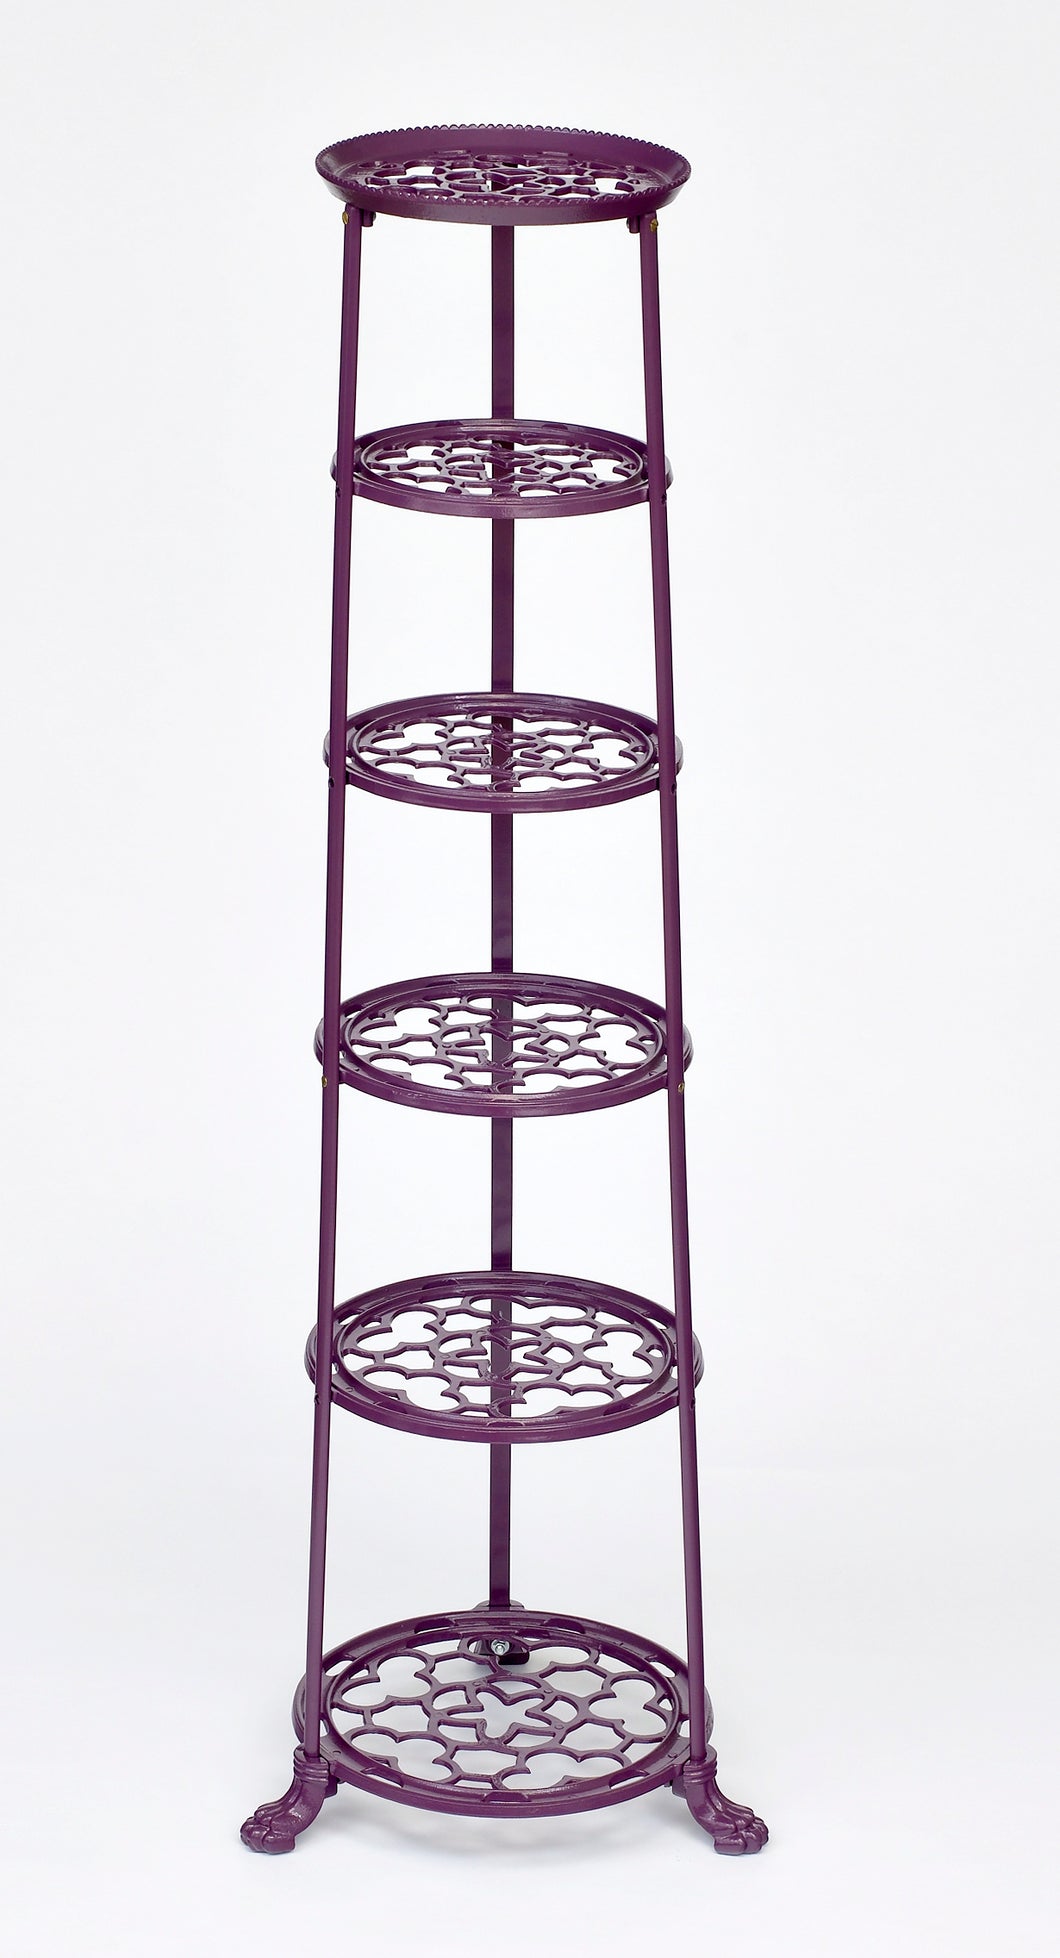 6 Tier Pan Stand Berry